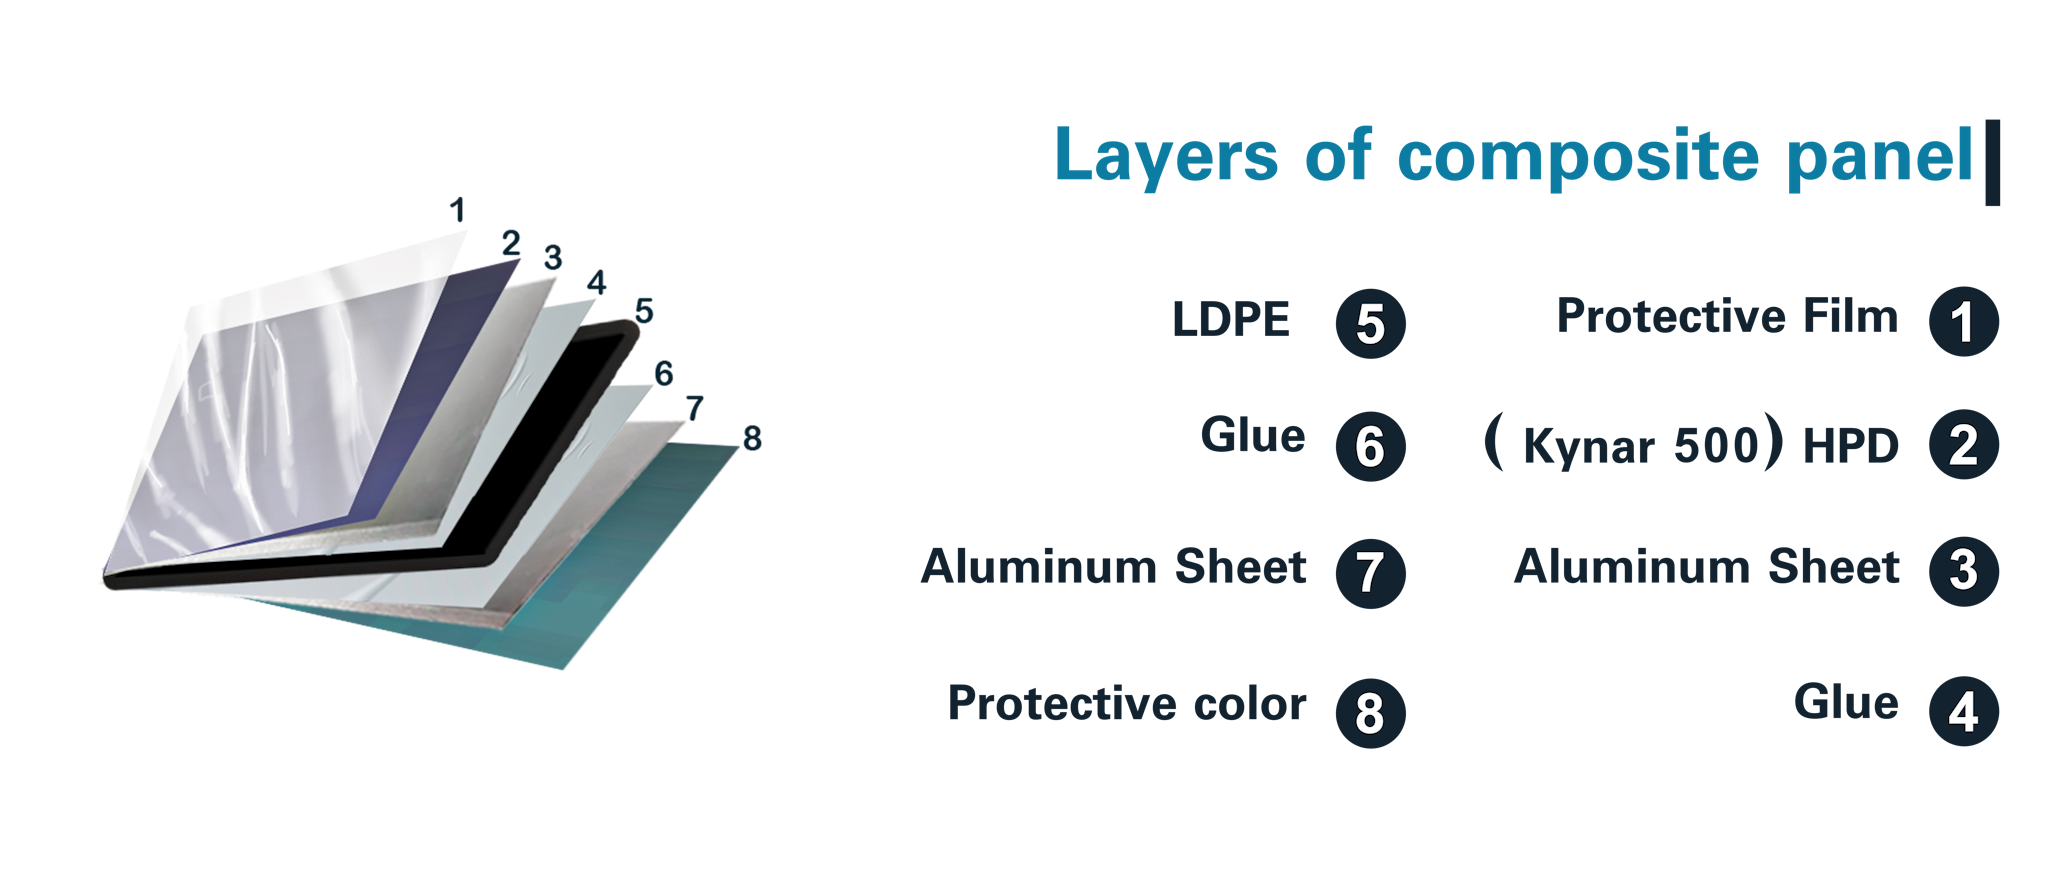 Composite Panel Layers